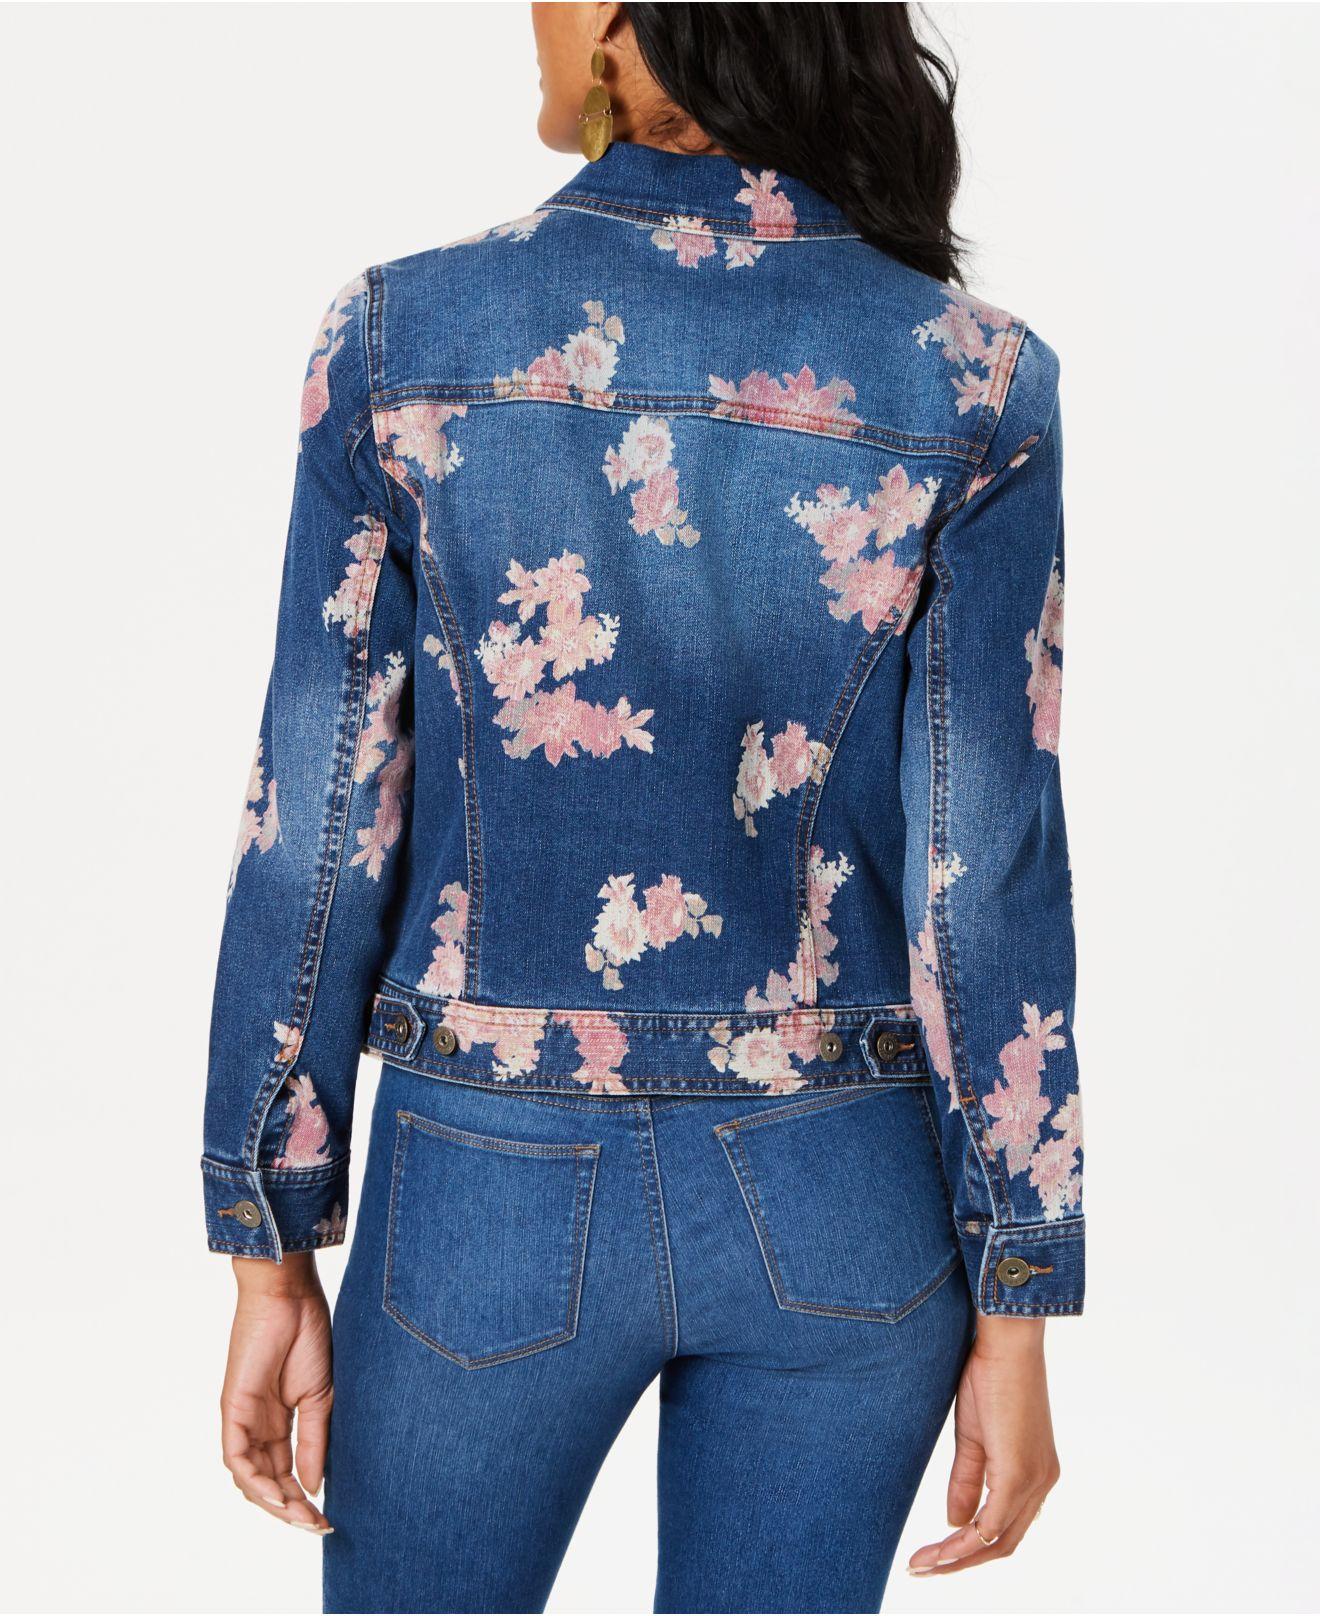 Denim & Co Size Small Blue Jean Jacket Floral Embroidery QVC 40 Bust